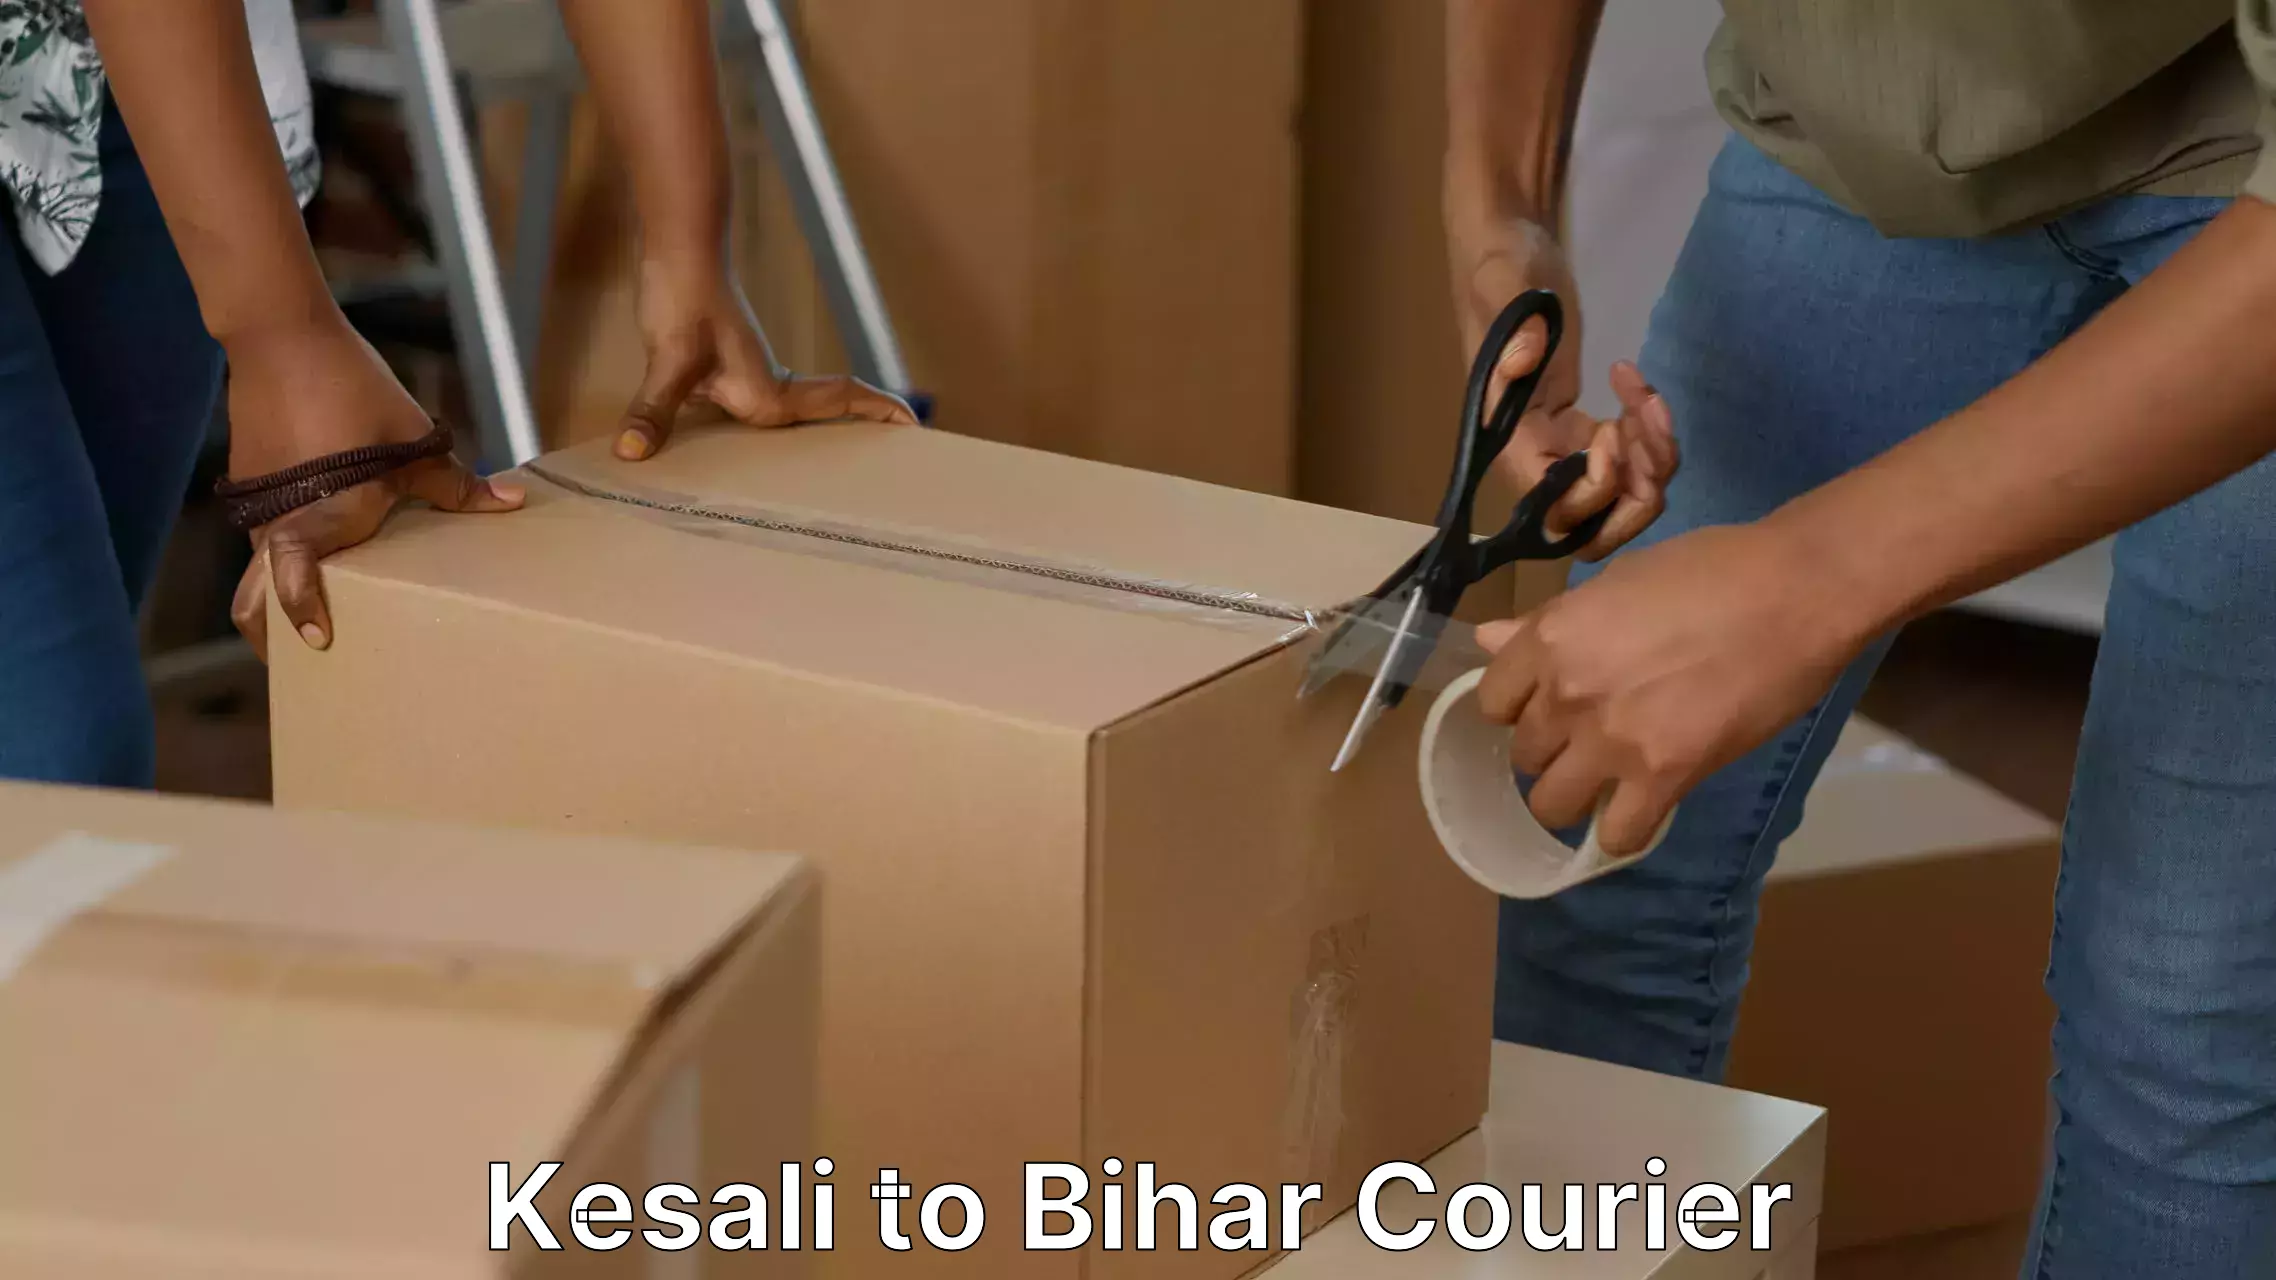 Smooth relocation services Kesali to Dhaka